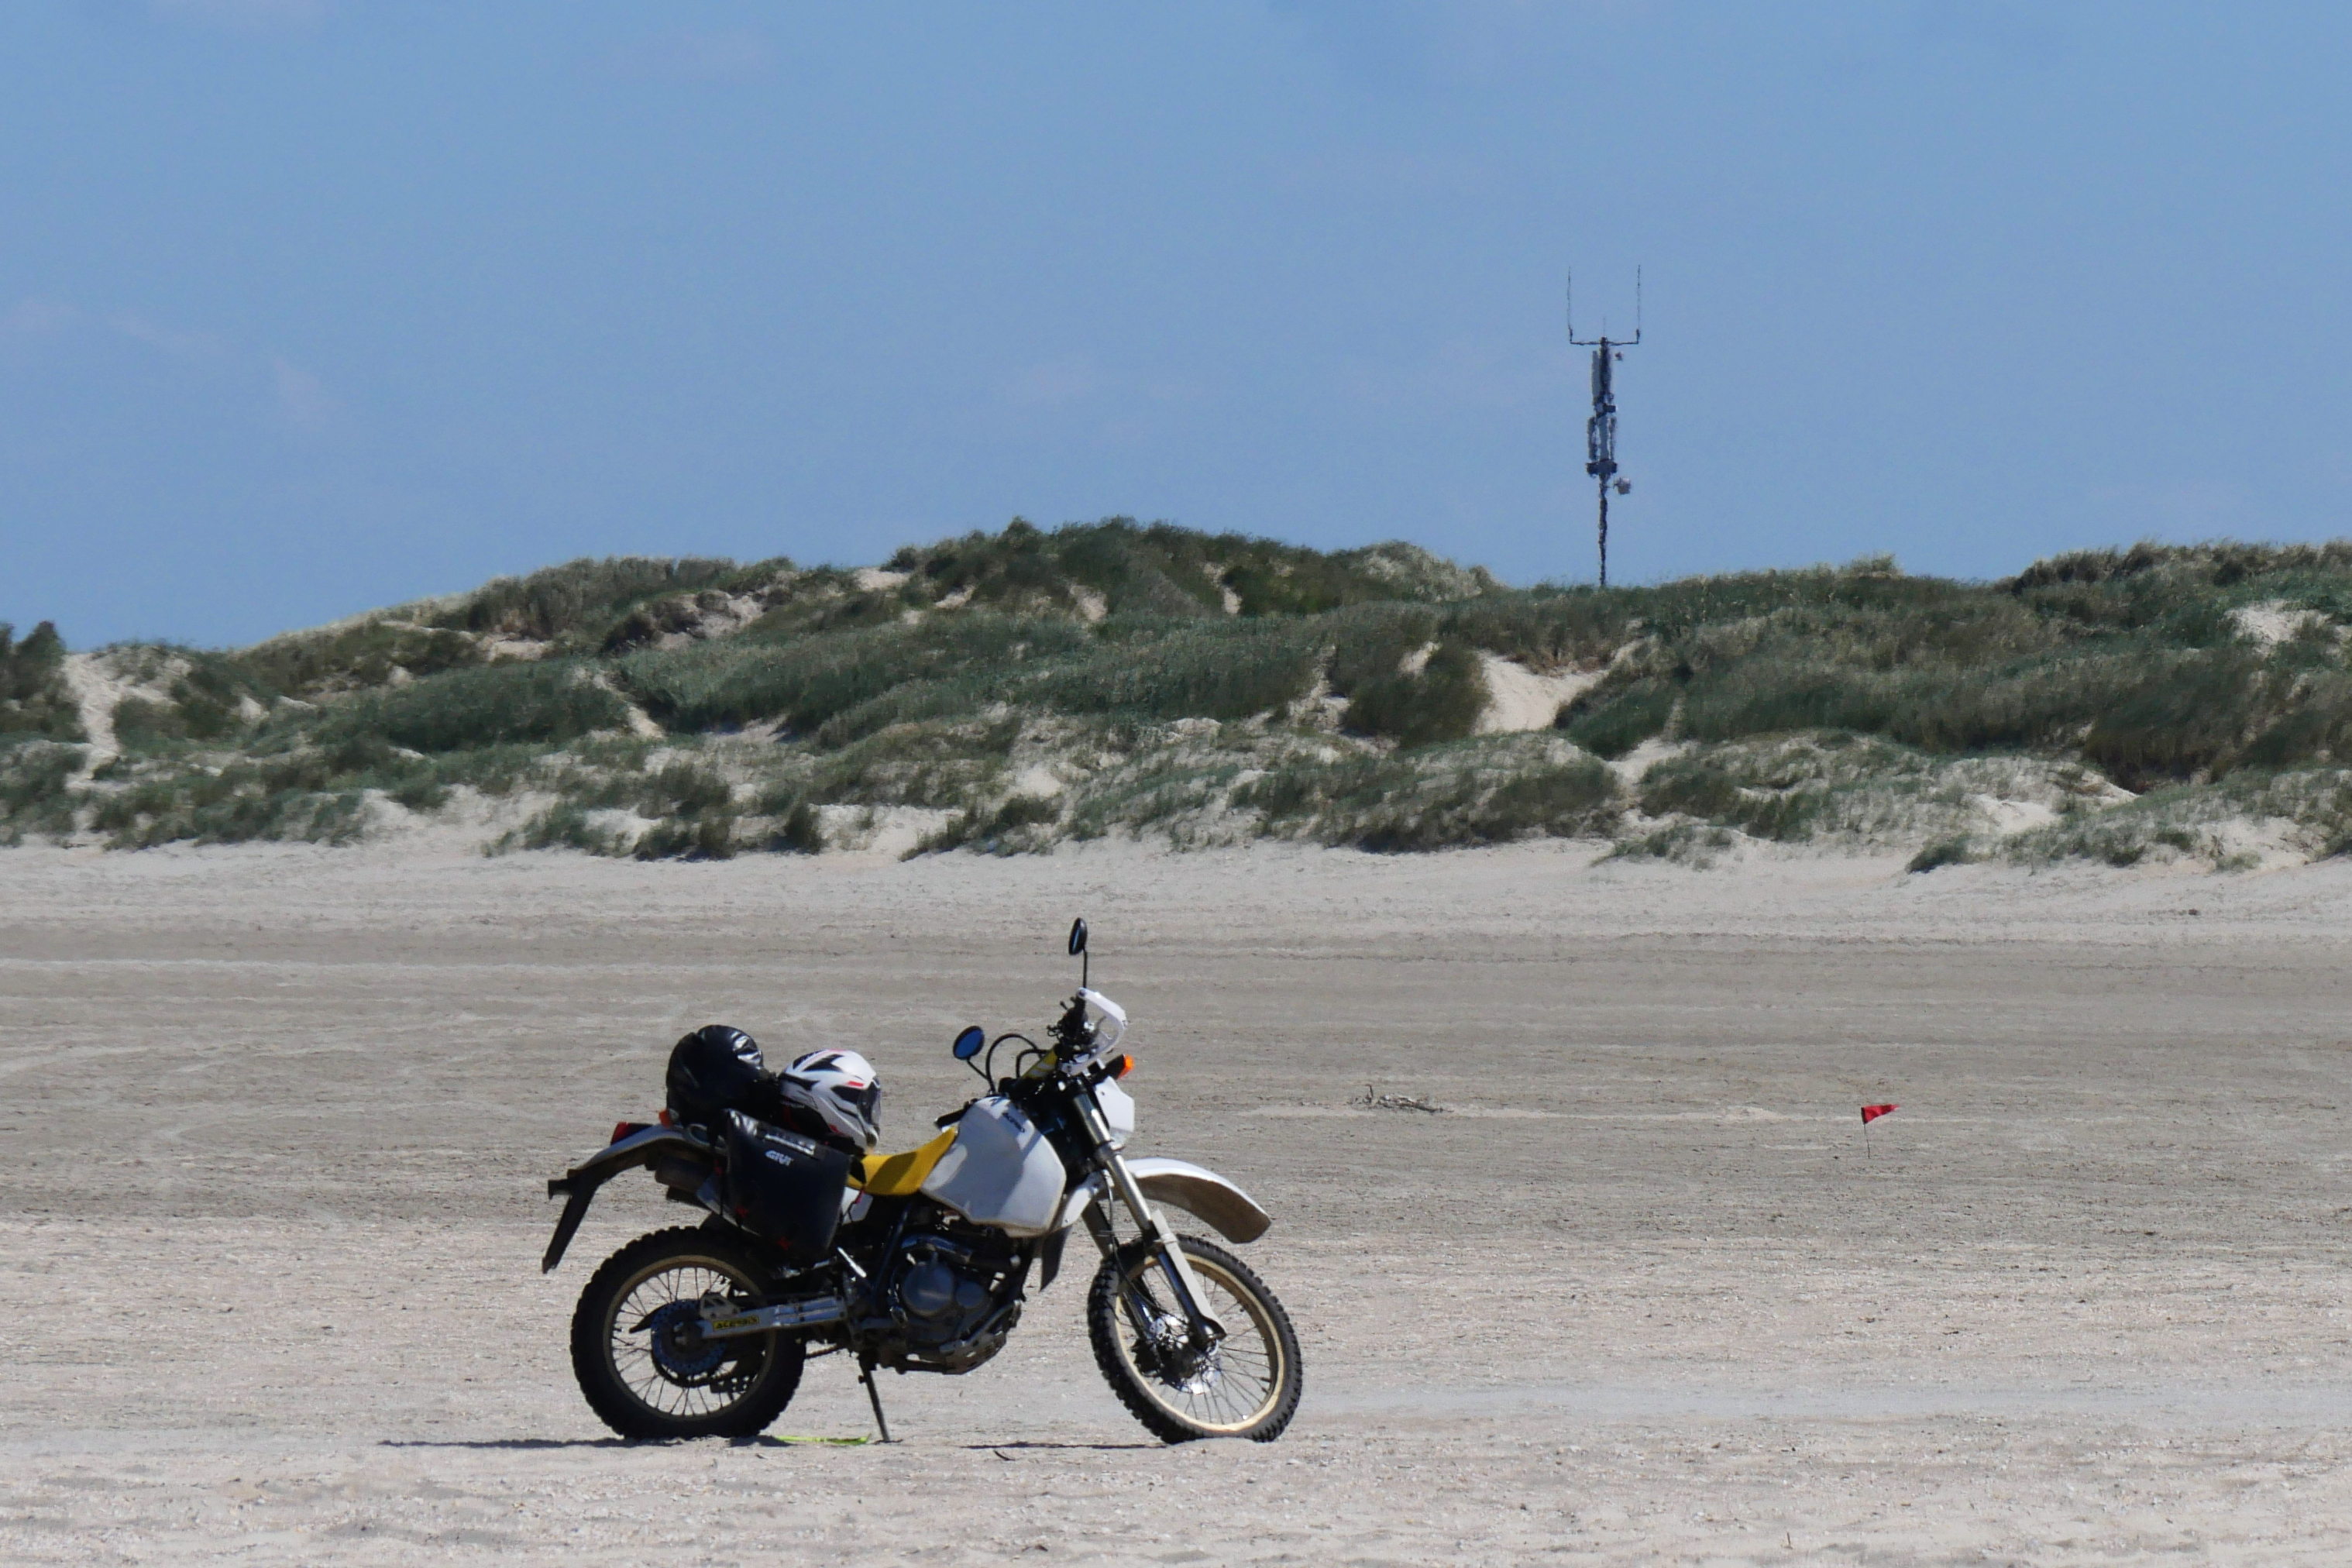 The beach of Romo with a motorcycle